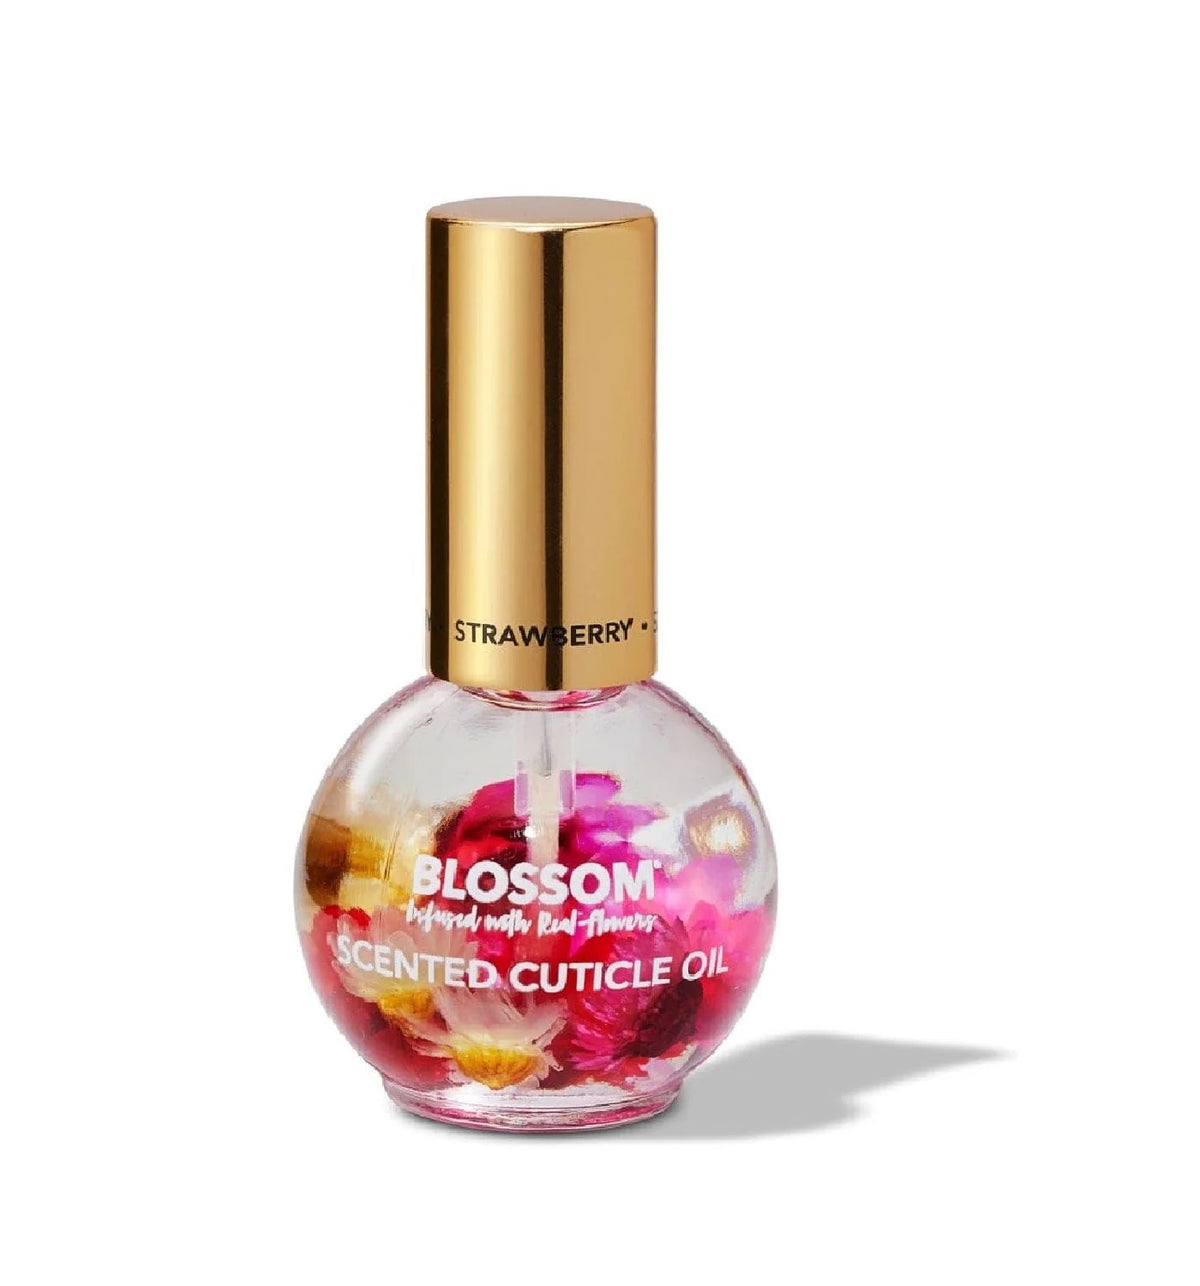 Fruit Scented Cuticle Oil Cover